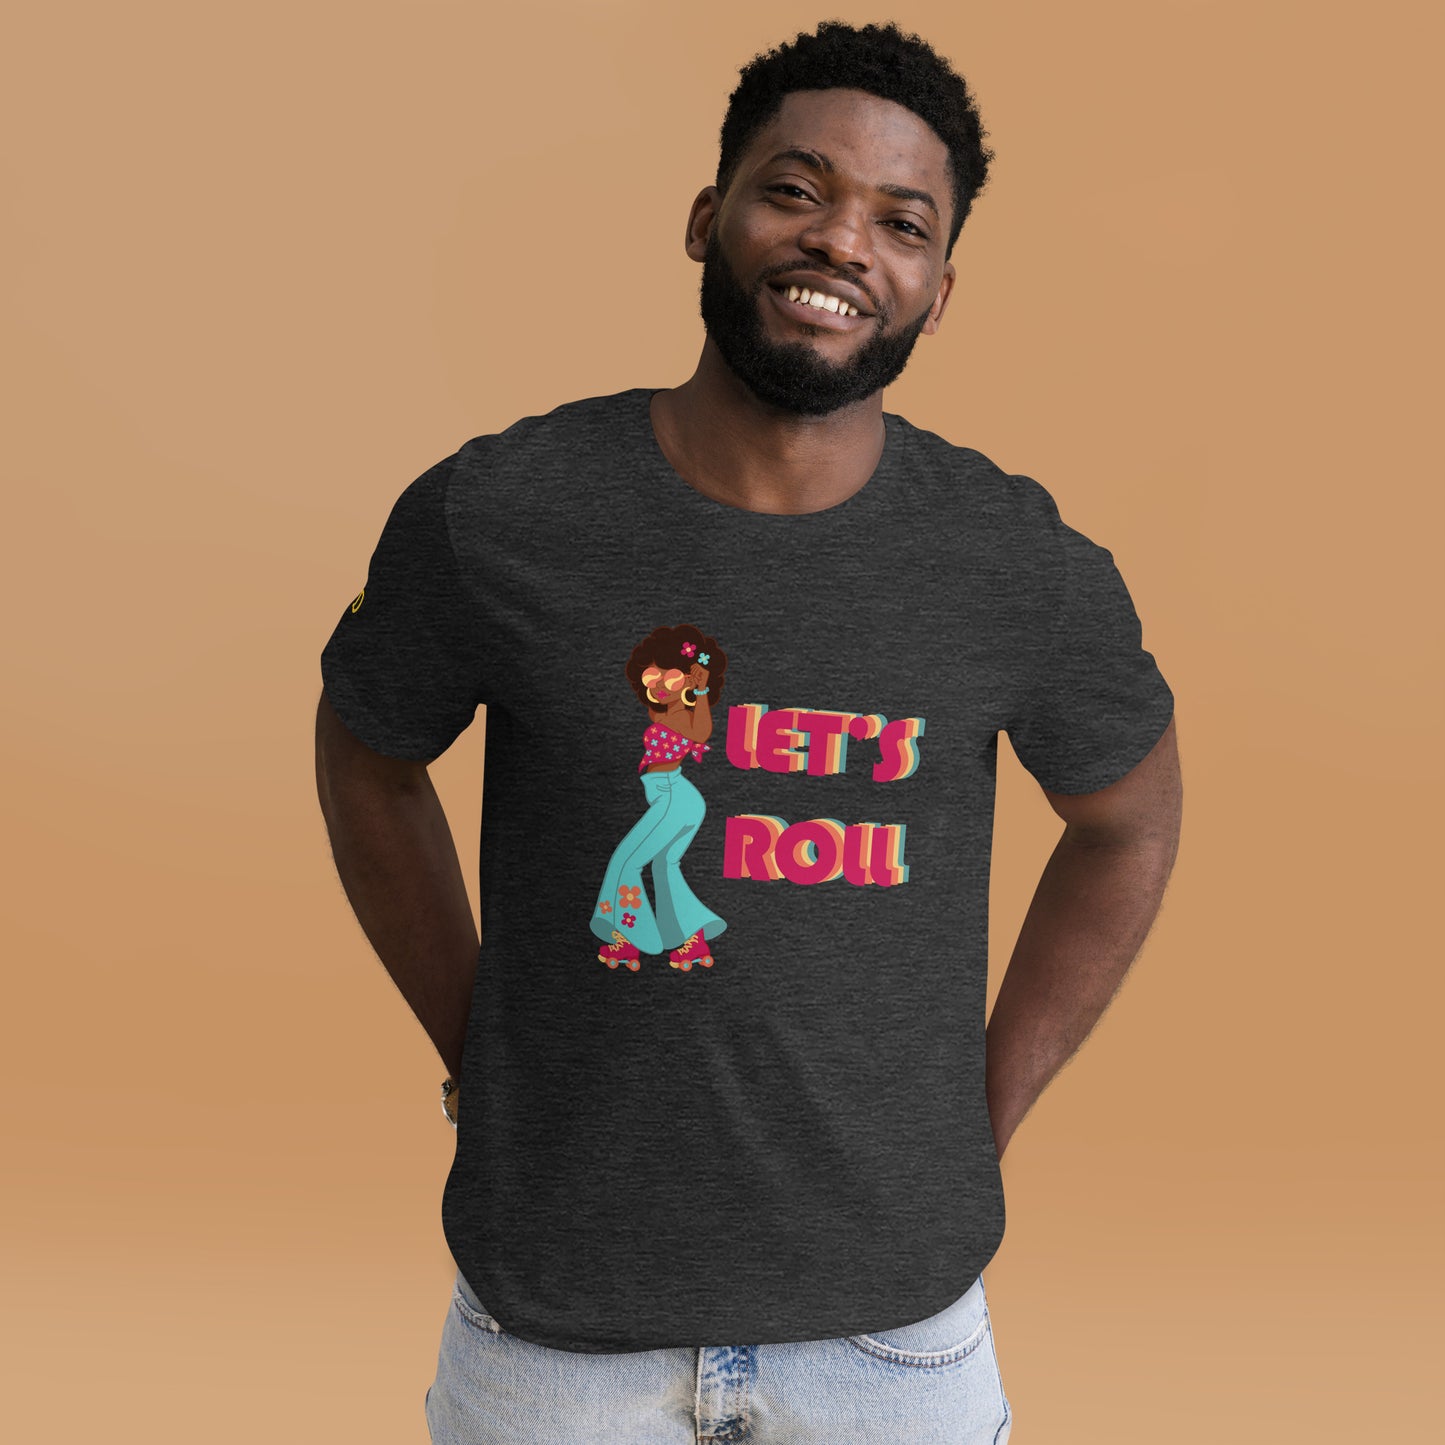 Let's Roll t-shirt